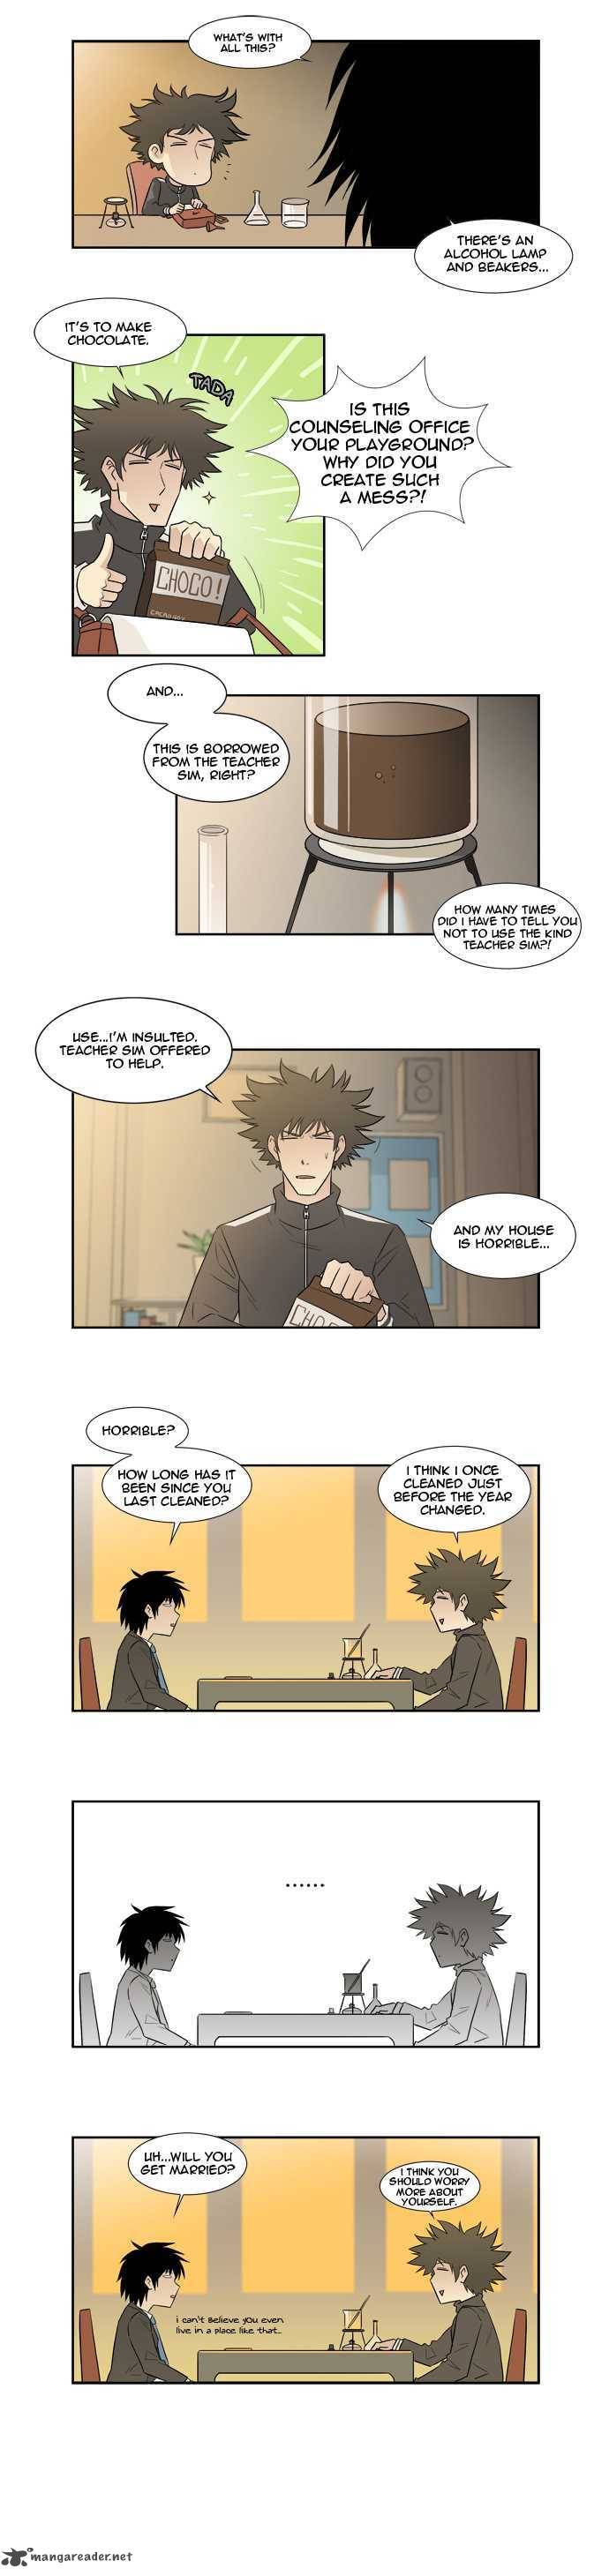 Melo Holic Chapter 2 Page 2